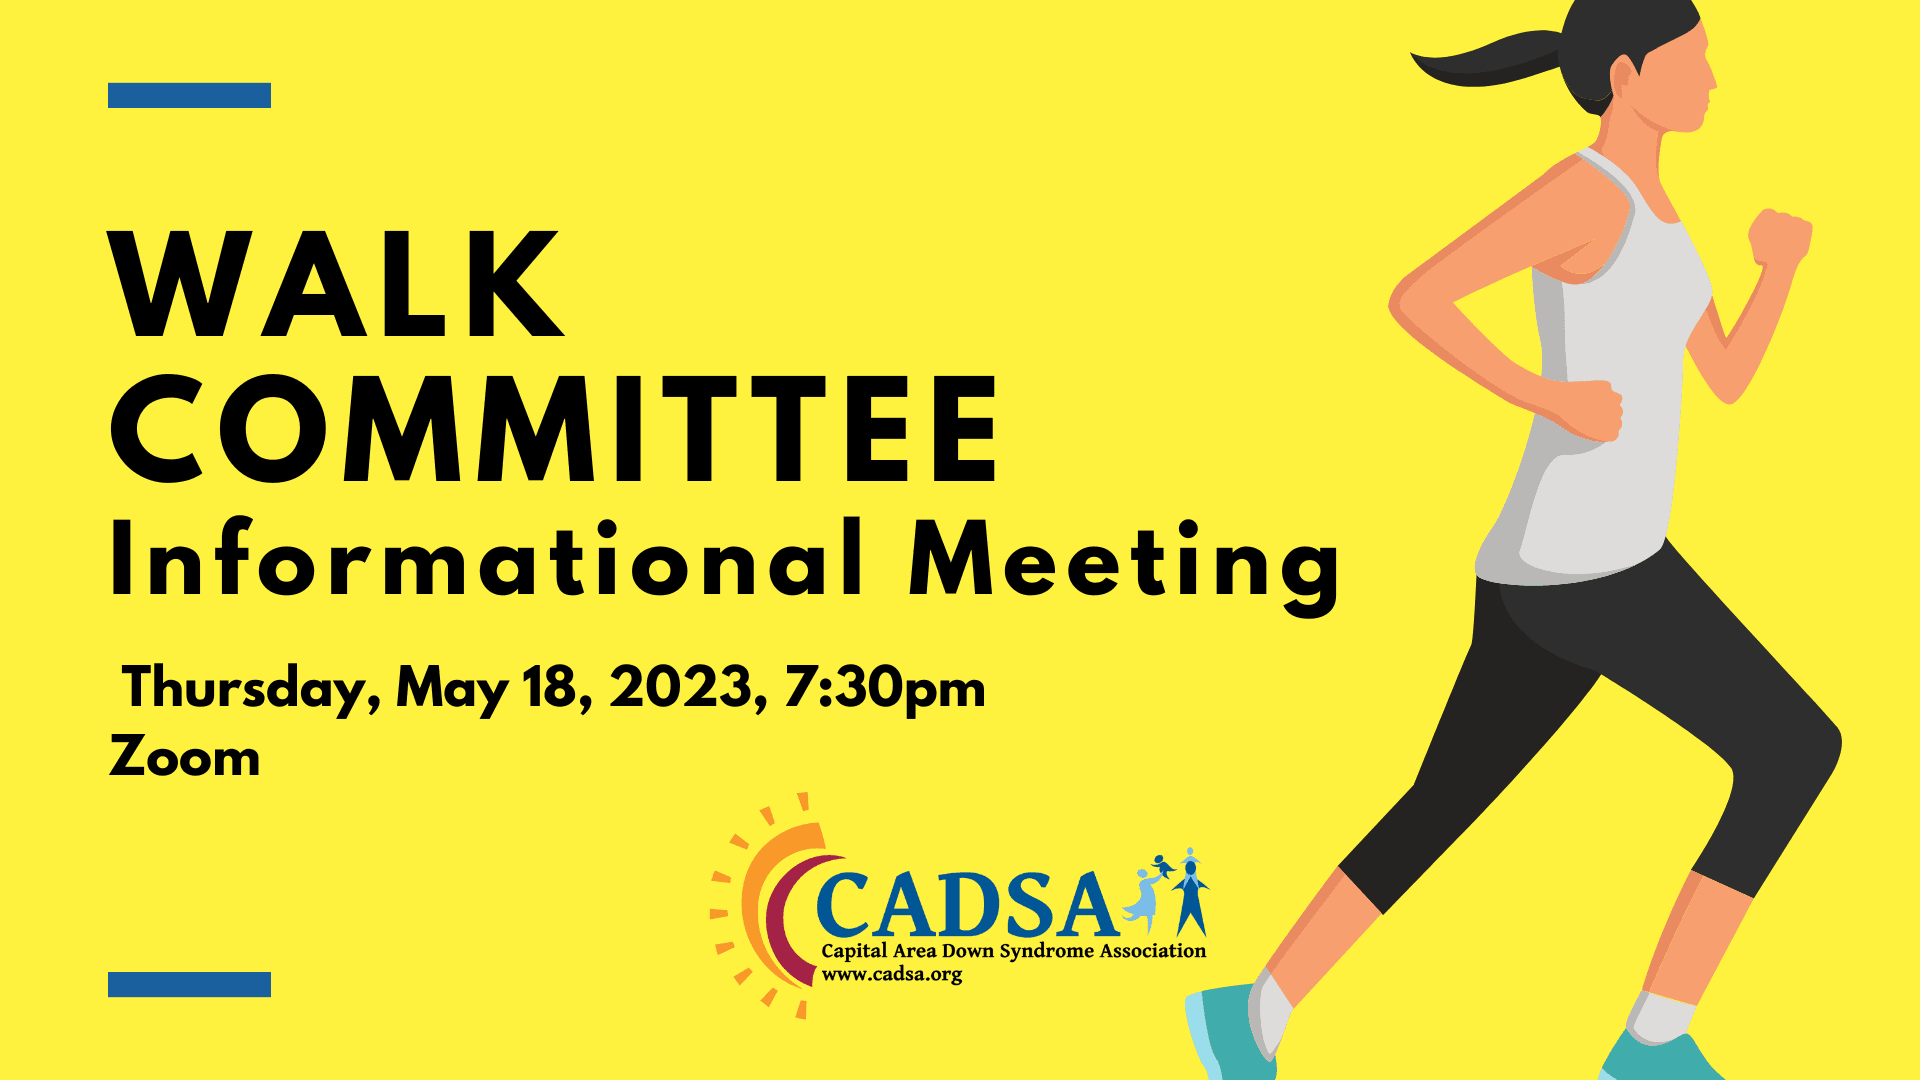 A graphic of a woman running with a yellow background. Text reading "Walk Committee Informational Meeting Thursday, May 18, 2023, 7:30pm, Zoom" is written in black. The CADSA logo is along the bottom.